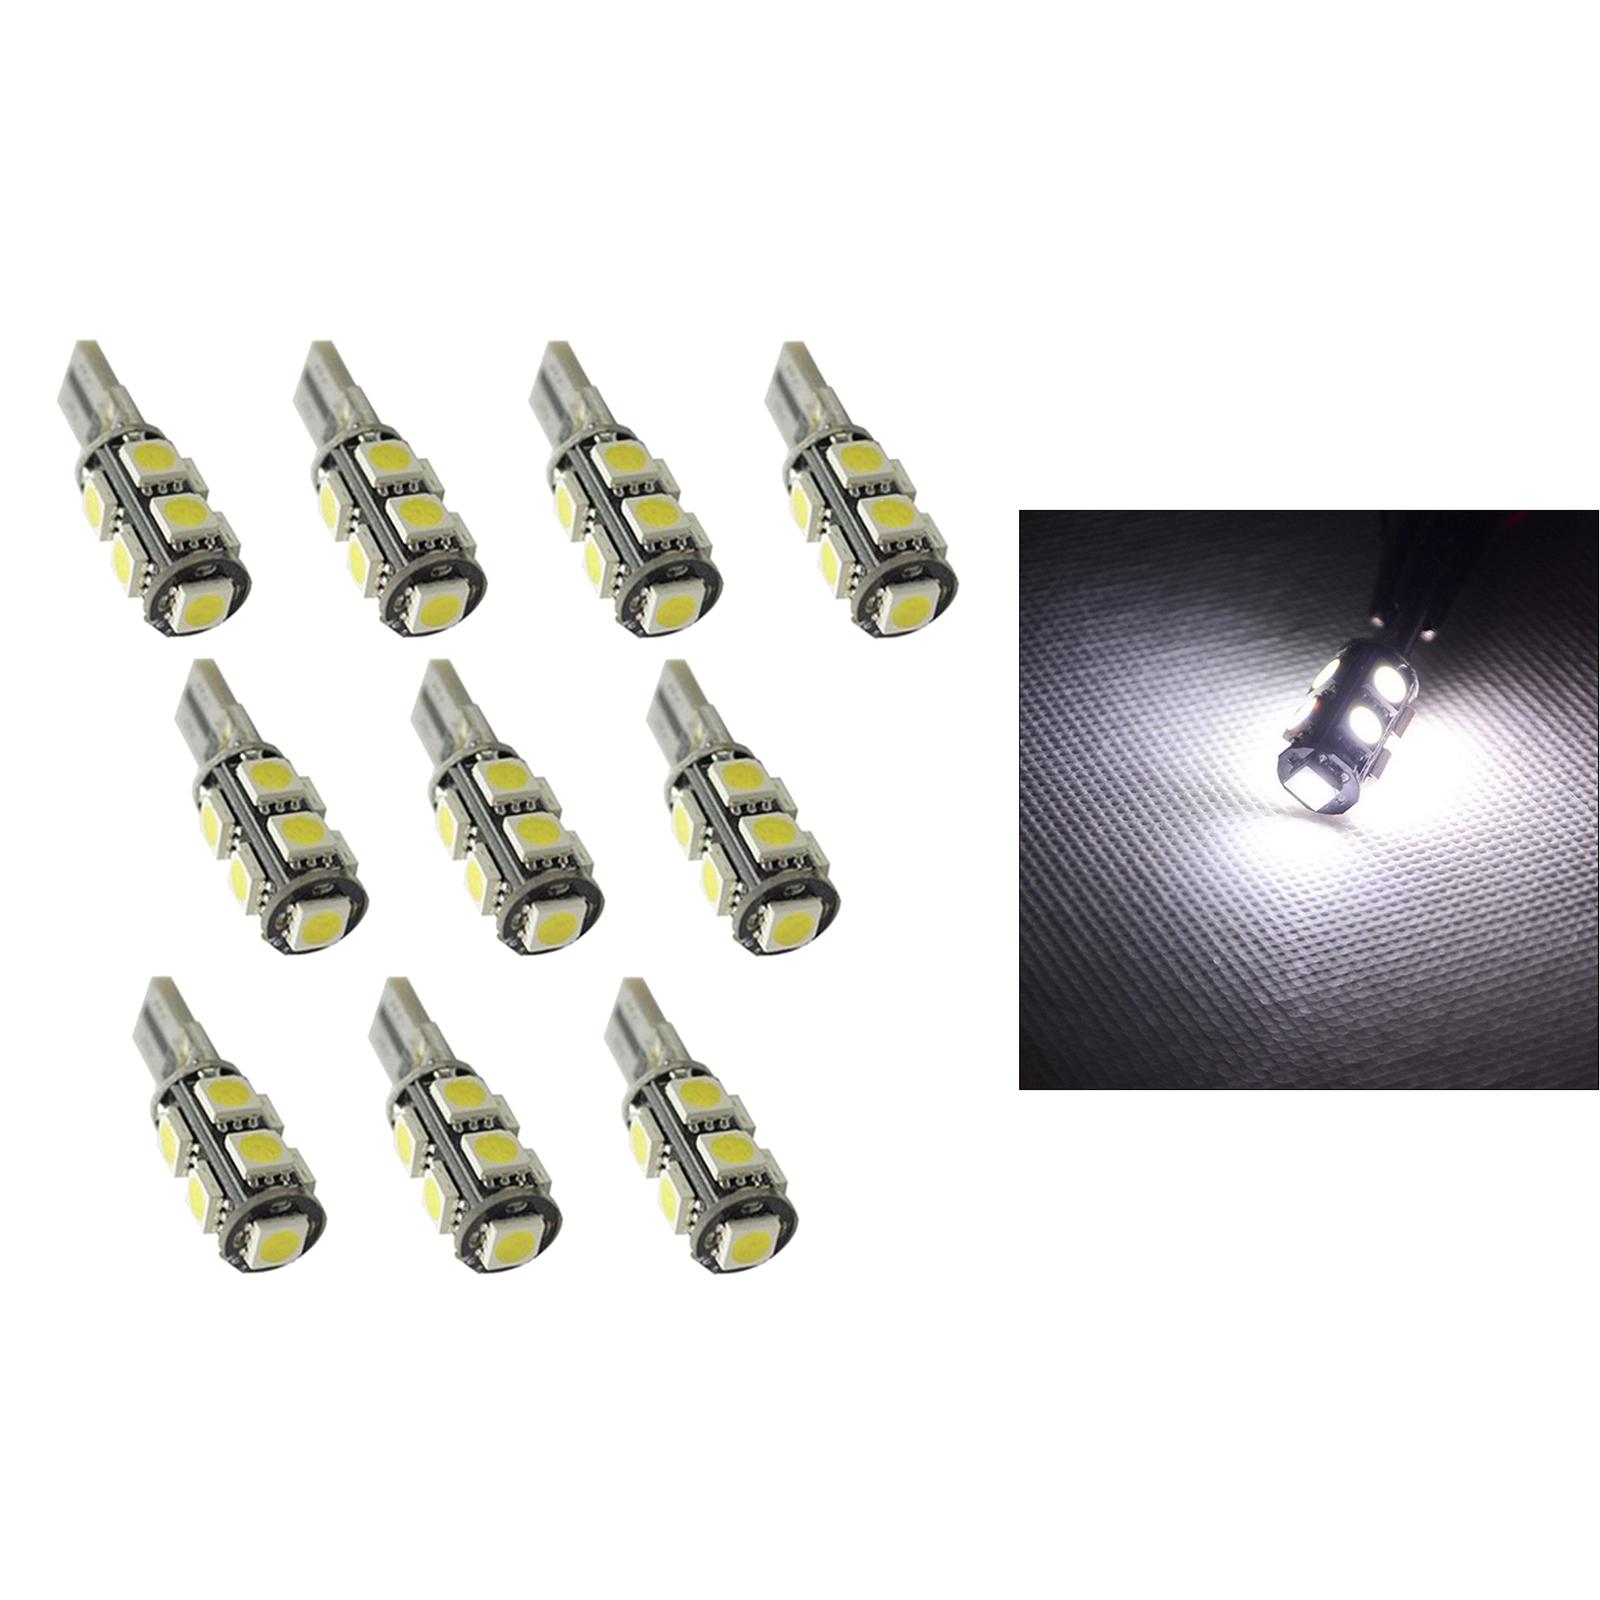 10Pieces W5W T10 Replacement LED Light Bulb for RV Interior Lighting